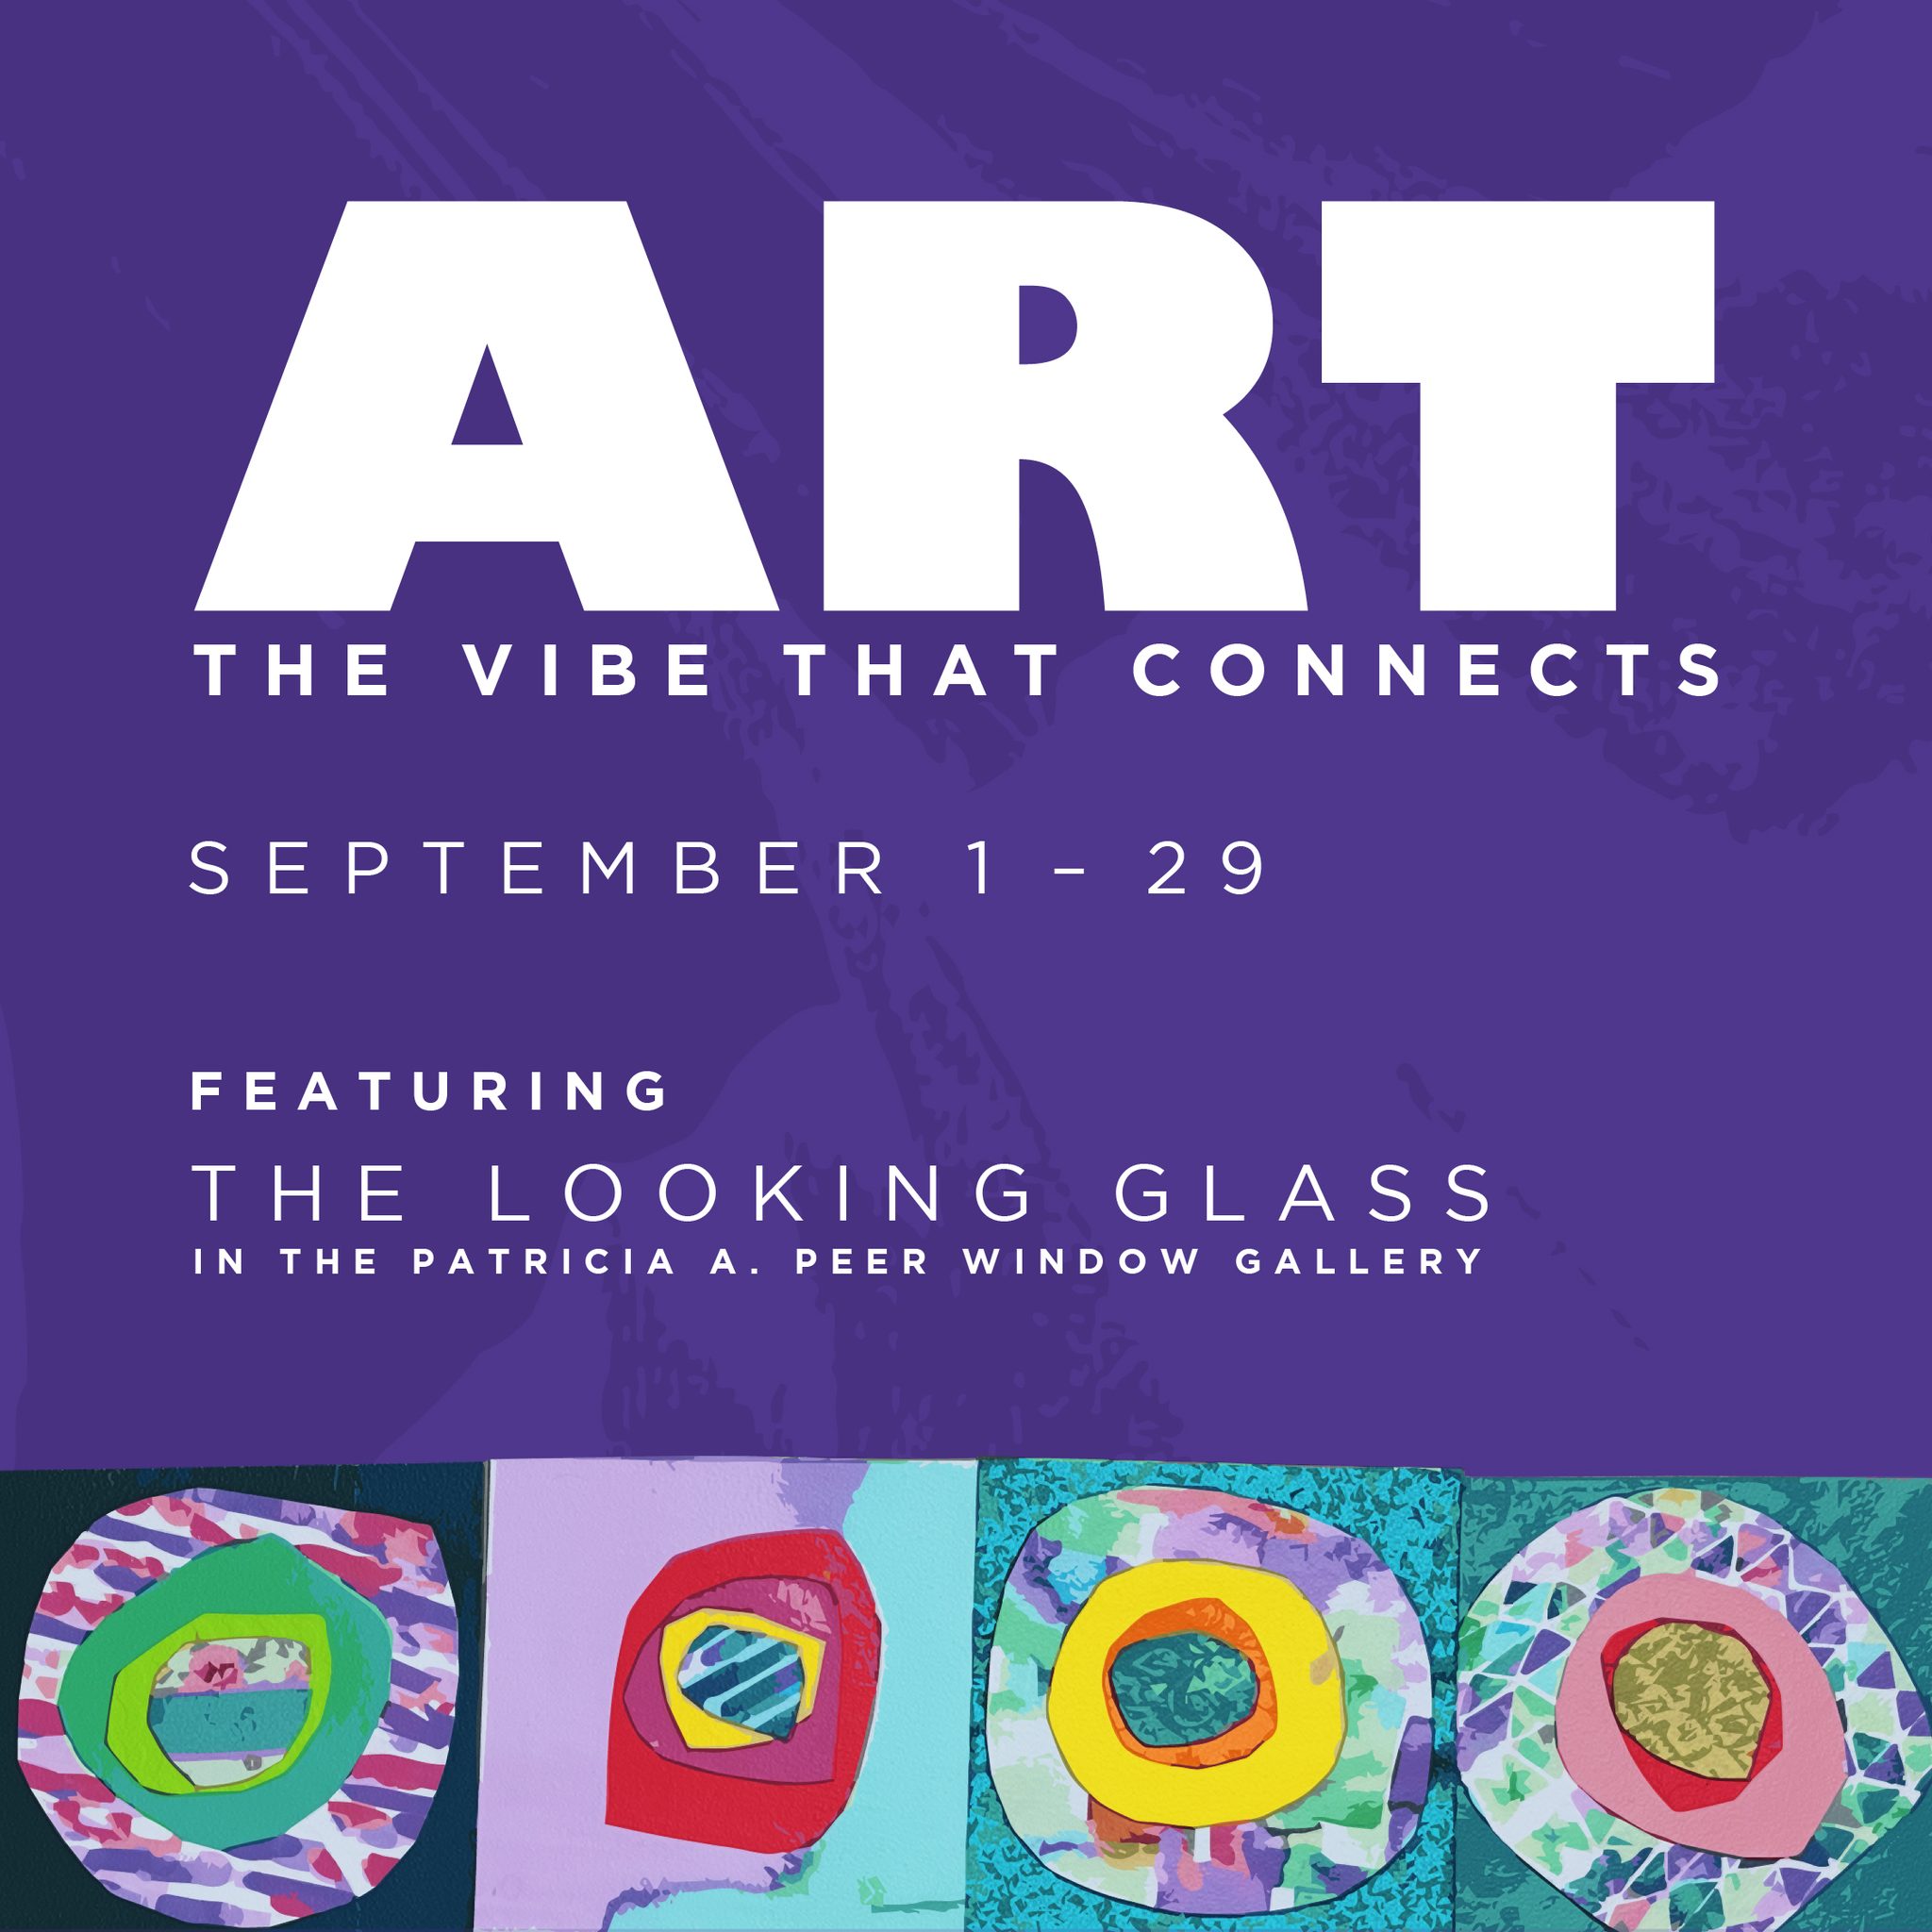 ART: The Vibe That Connects by The Looking Glass. On display September 1 - 29 in the Patricia A. Peer Window Gallery.